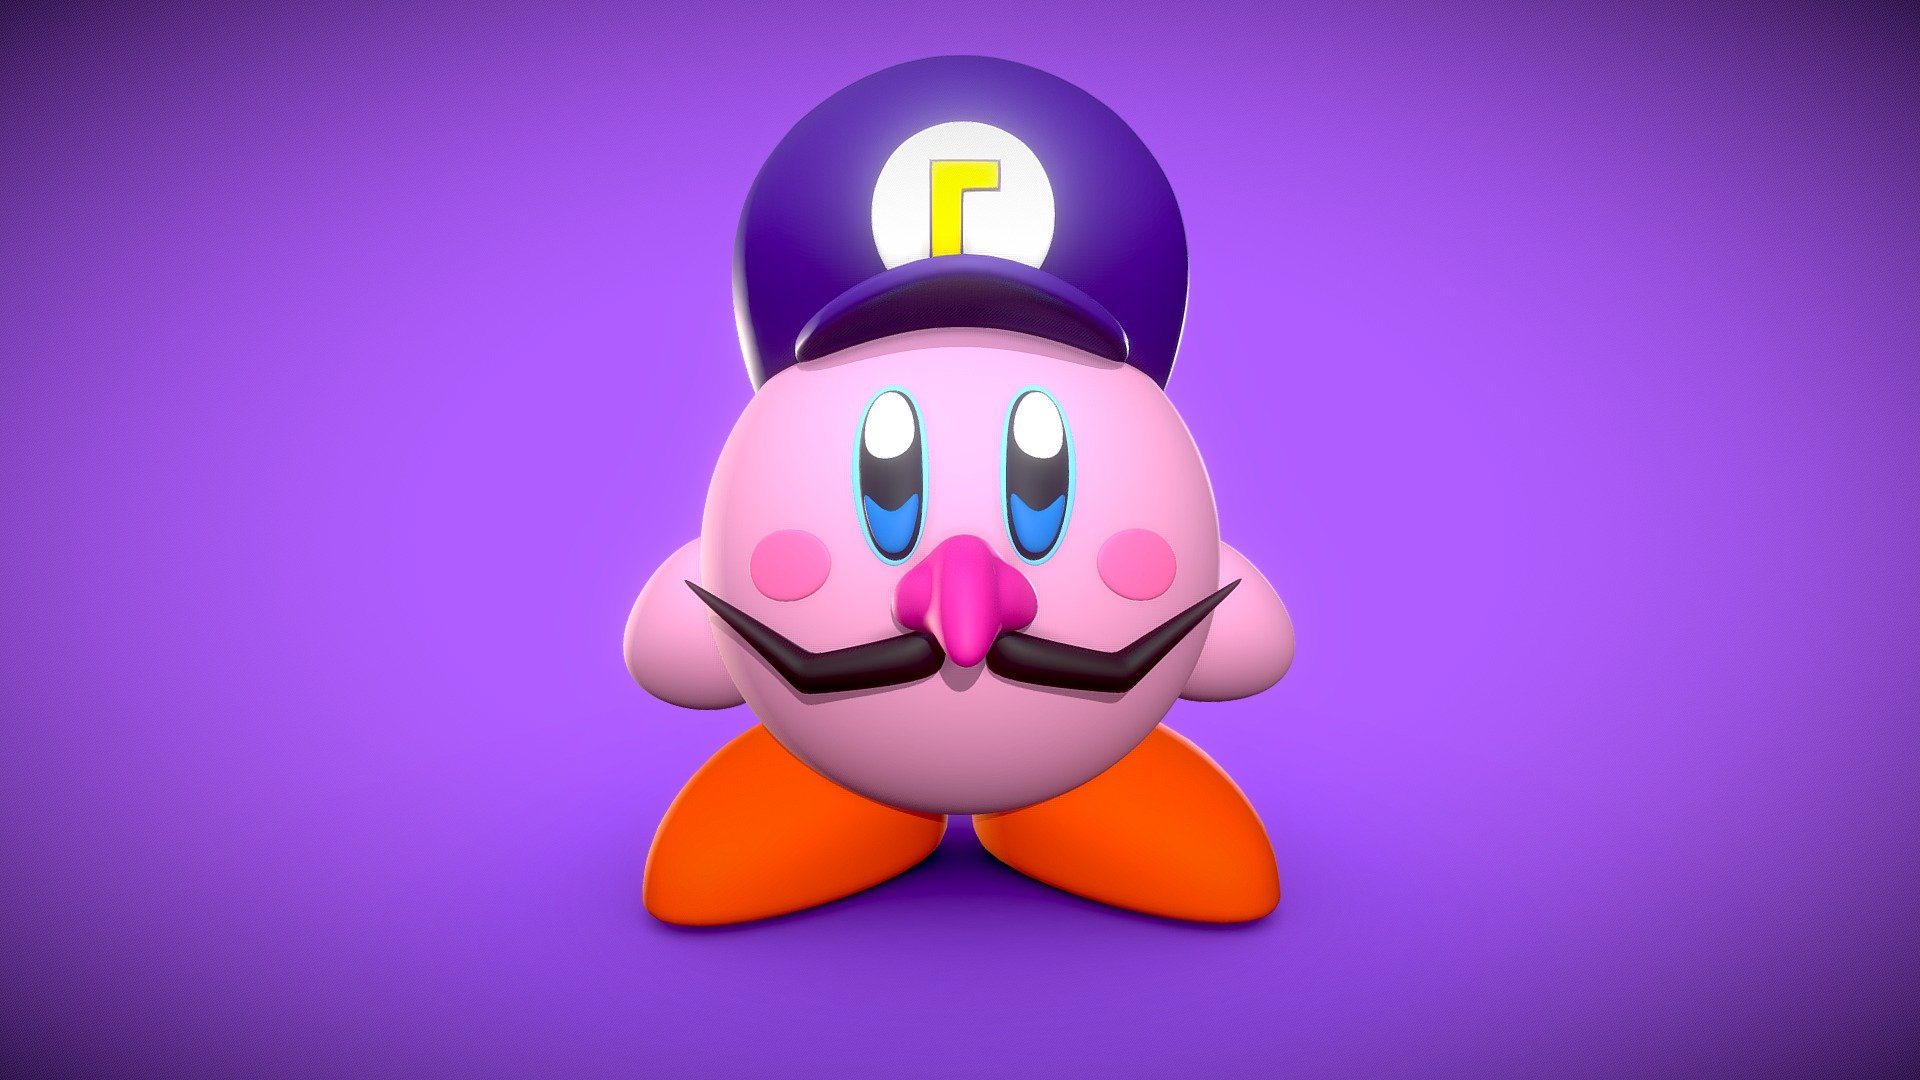 Kirby Transformed into Waluigi.

Image Gallery

This model is part of the Kirby/Mario crossover collection. See other models from this collection:




Mario Kirby: https://skfb.ly/o986y

Luigi Kirby: https://skfb.ly/ounWs

Princess Peach Kirby : https://skfb.ly/oupnF

Bowser Kirby: https://skfb.ly/ou6X7

Wario Kirby: https://skfb.ly/ouK7w

Waluigi: https://skfb.ly/ouMC6
 - Waluigi Kirby - 3D PRINT - Buy Royalty Free 3D model by LessaB3D 3d model